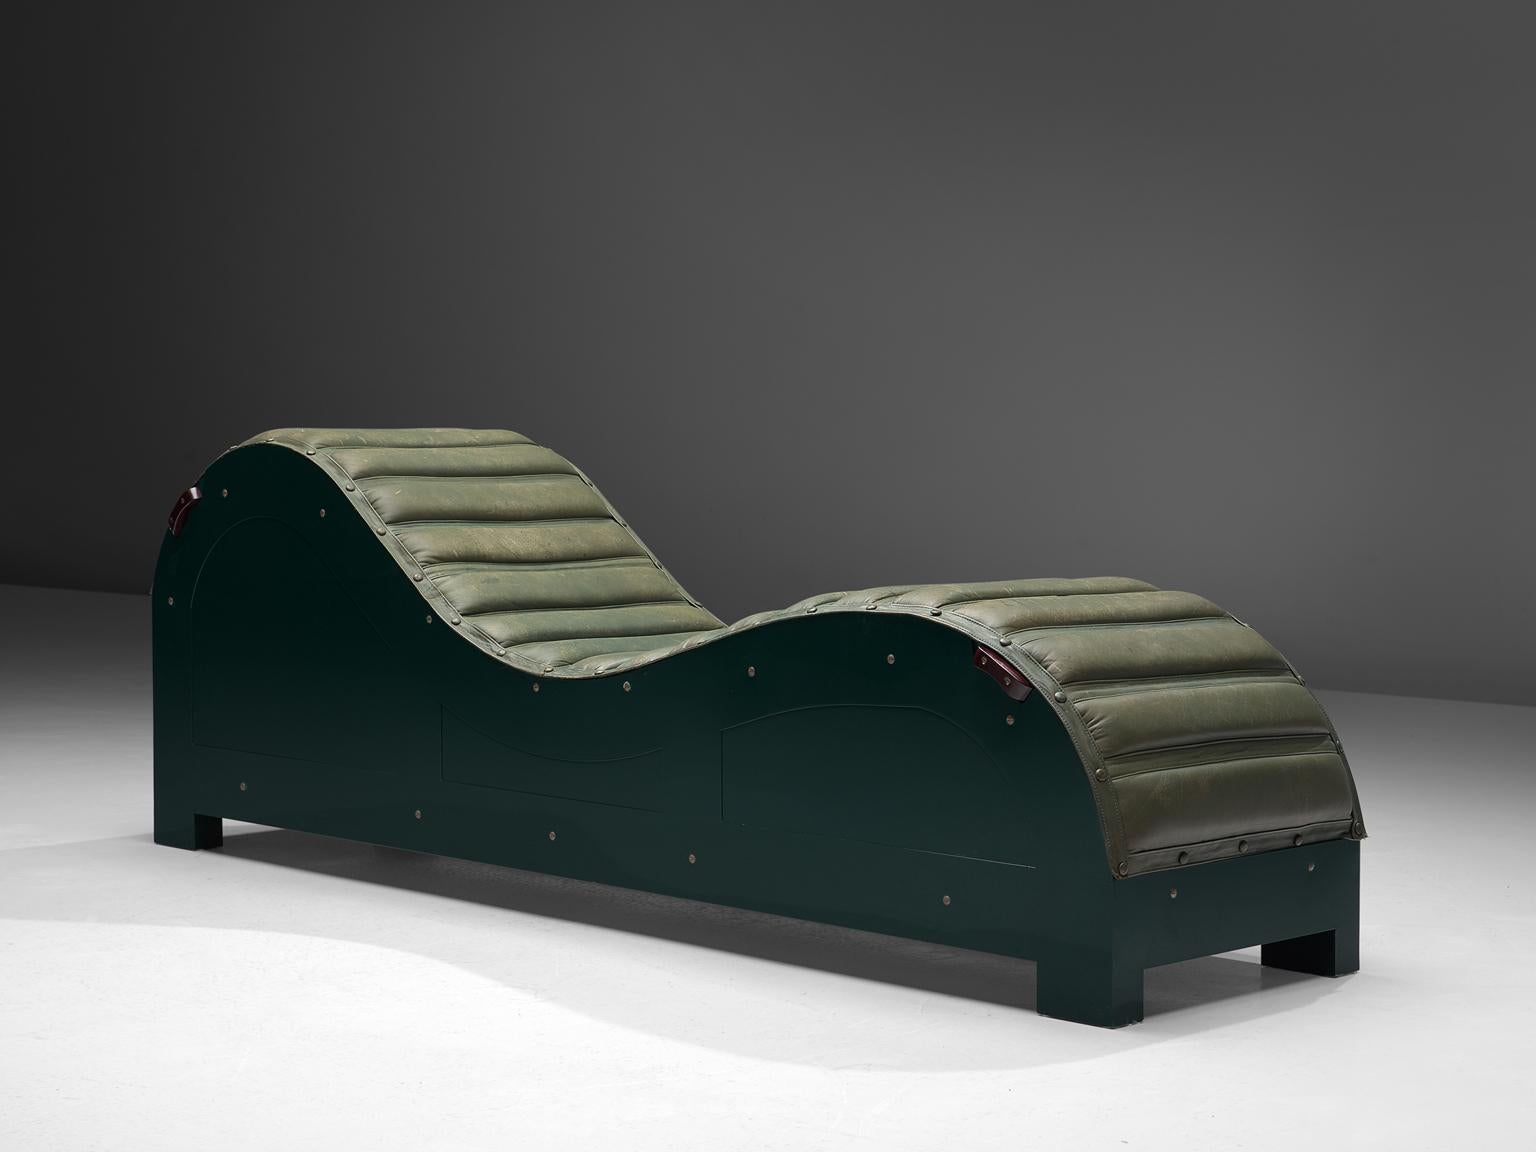 Mats Theselius for Källemo, haise longue, in steel and leather, Sweden 1992. 

Limited edition daybed, number 8 out of 50. This chaise was designed by Mats Theselius. It consist of a steel frame with car-enamel finish in green. The seating is